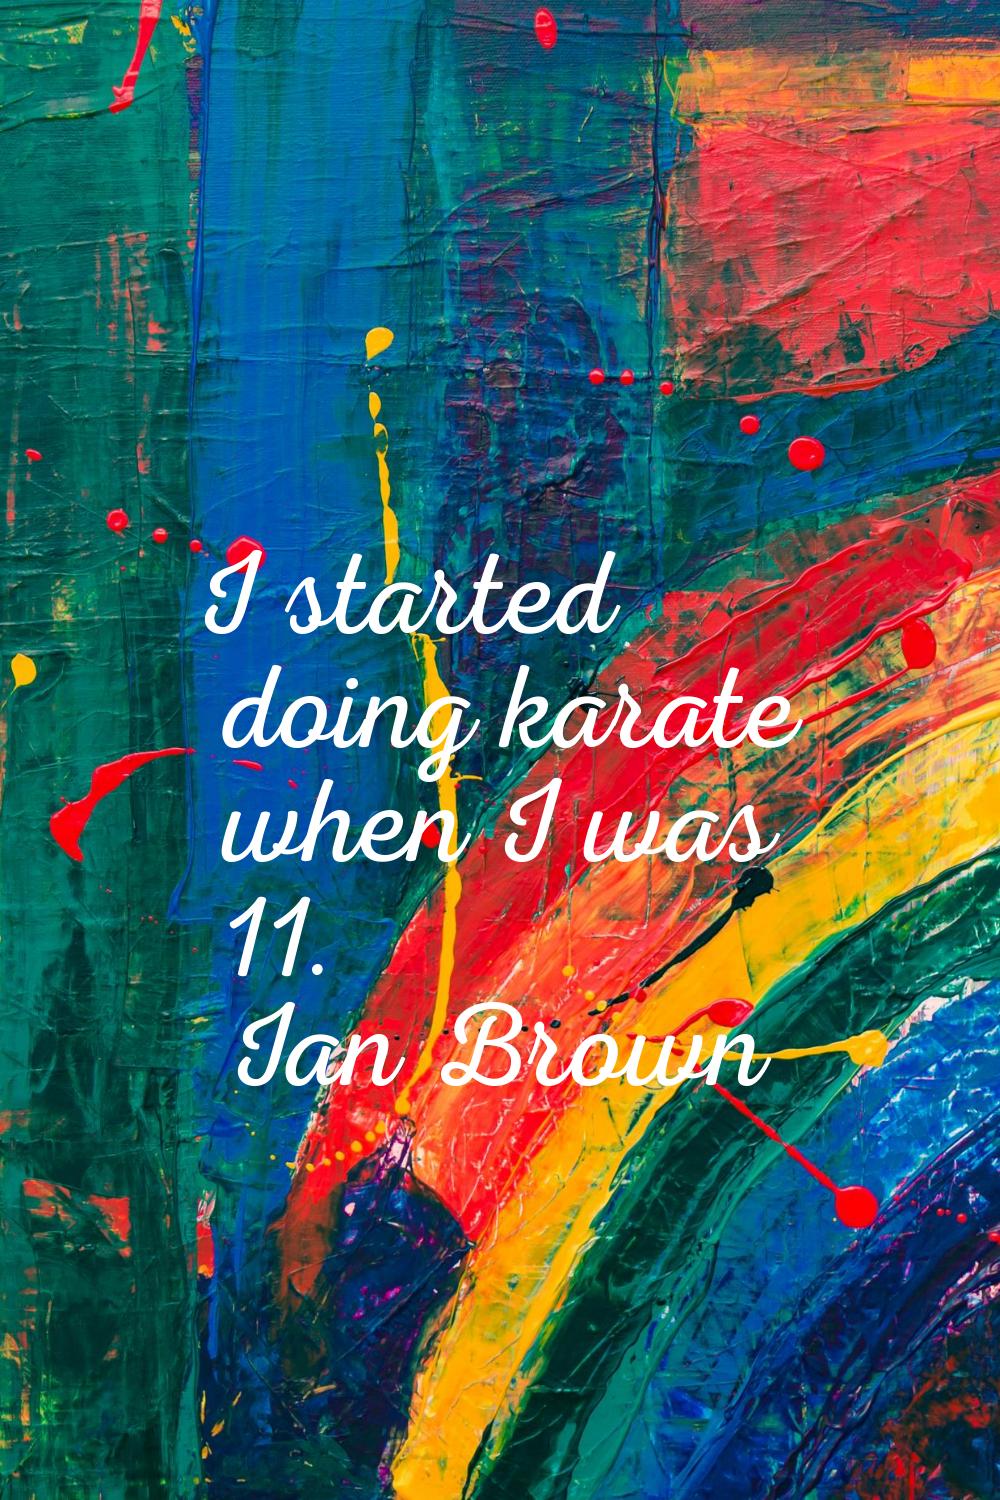 I started doing karate when I was 11.